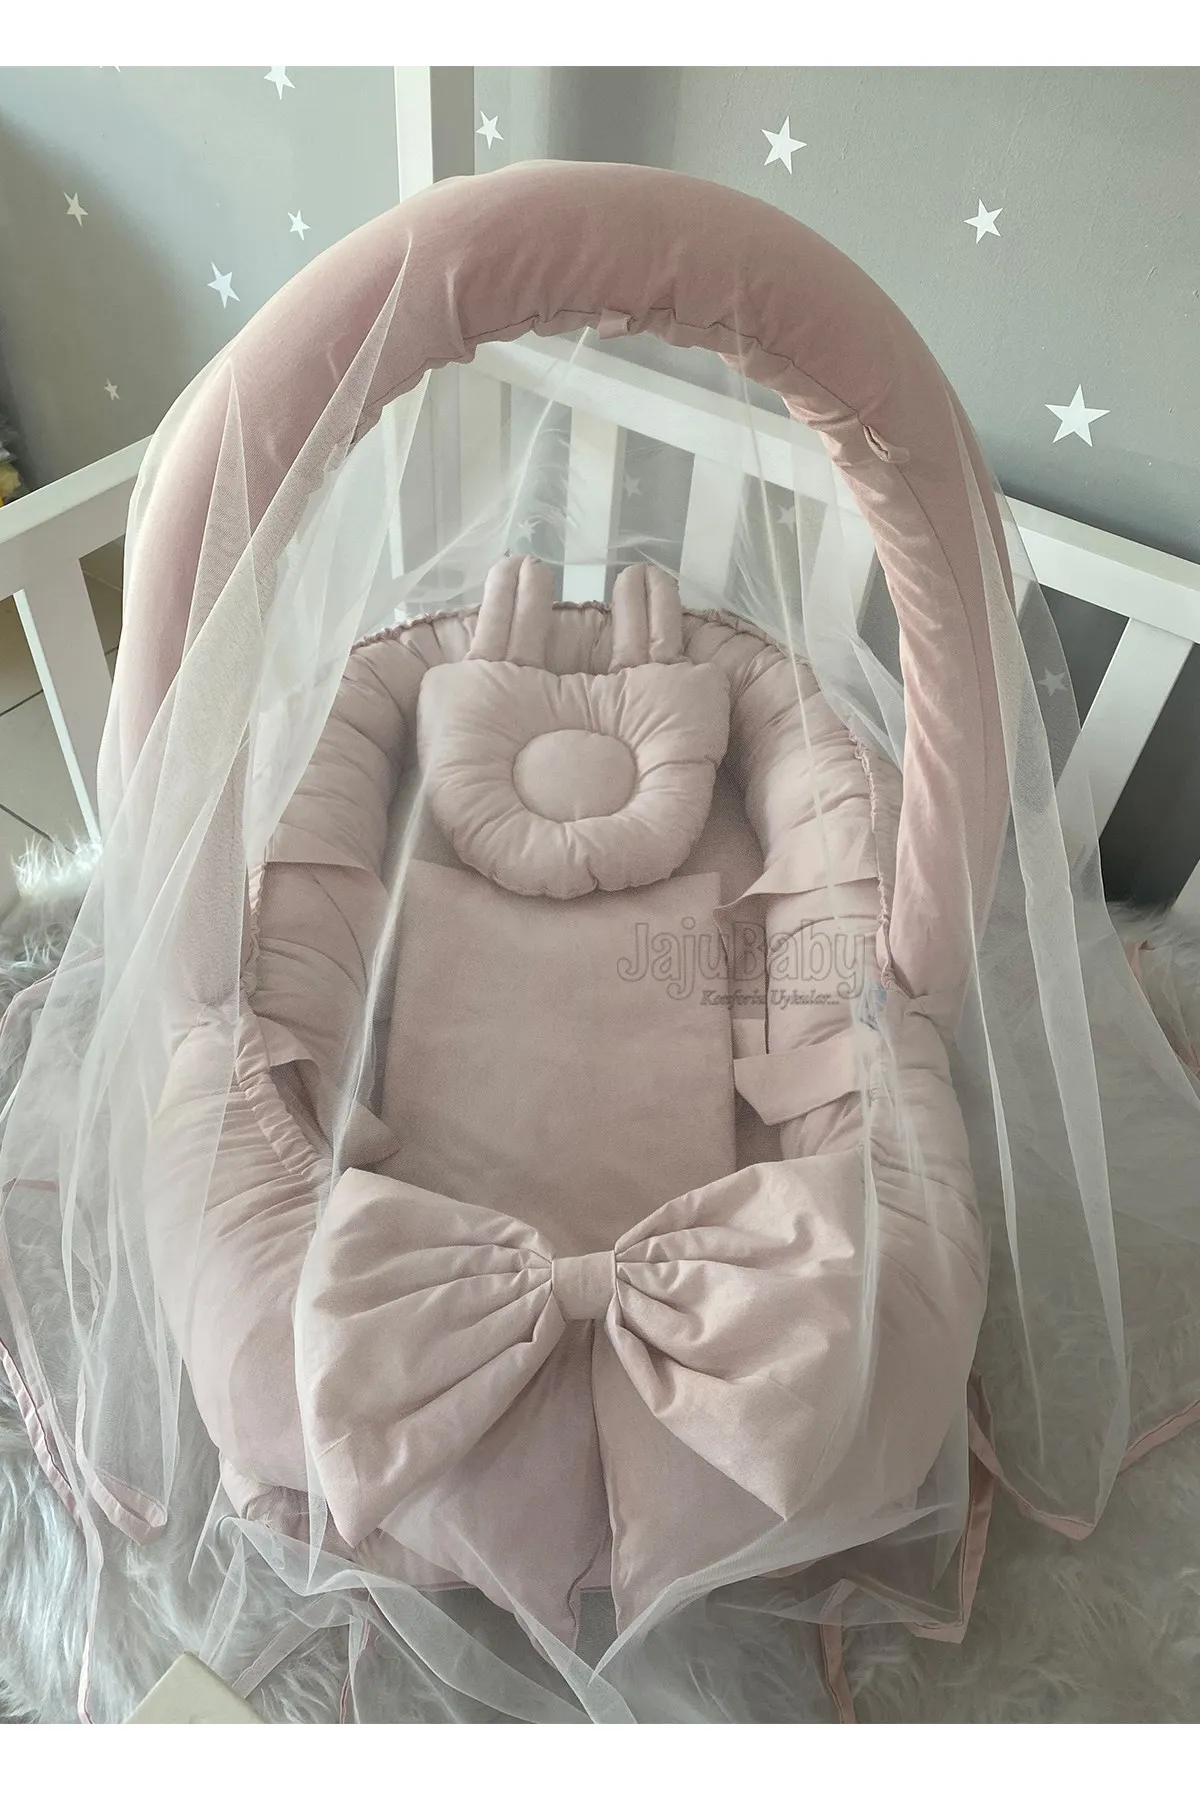 Jaju Baby Handmade Powder-Eared with Mosquito Net and Toy Apparatus Lux Orthopedic Design Babynest Mother Side Portable Baby Bed